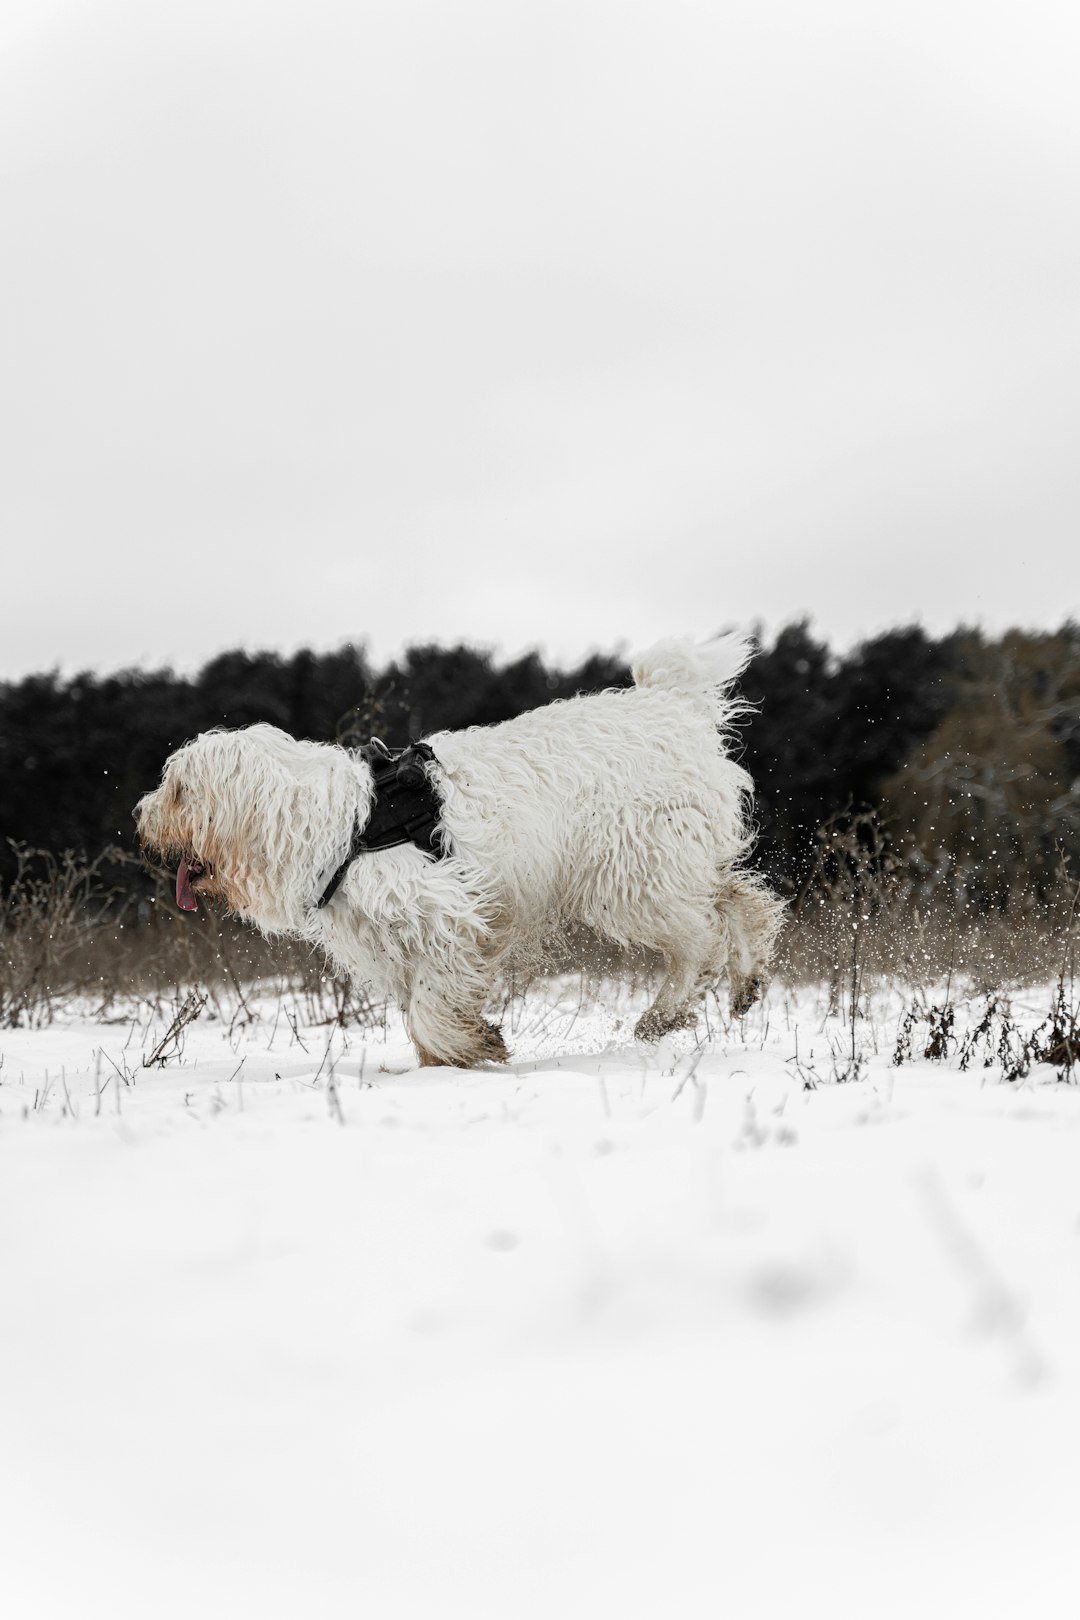 white and black long coated dog running on snow covered ground during daytime